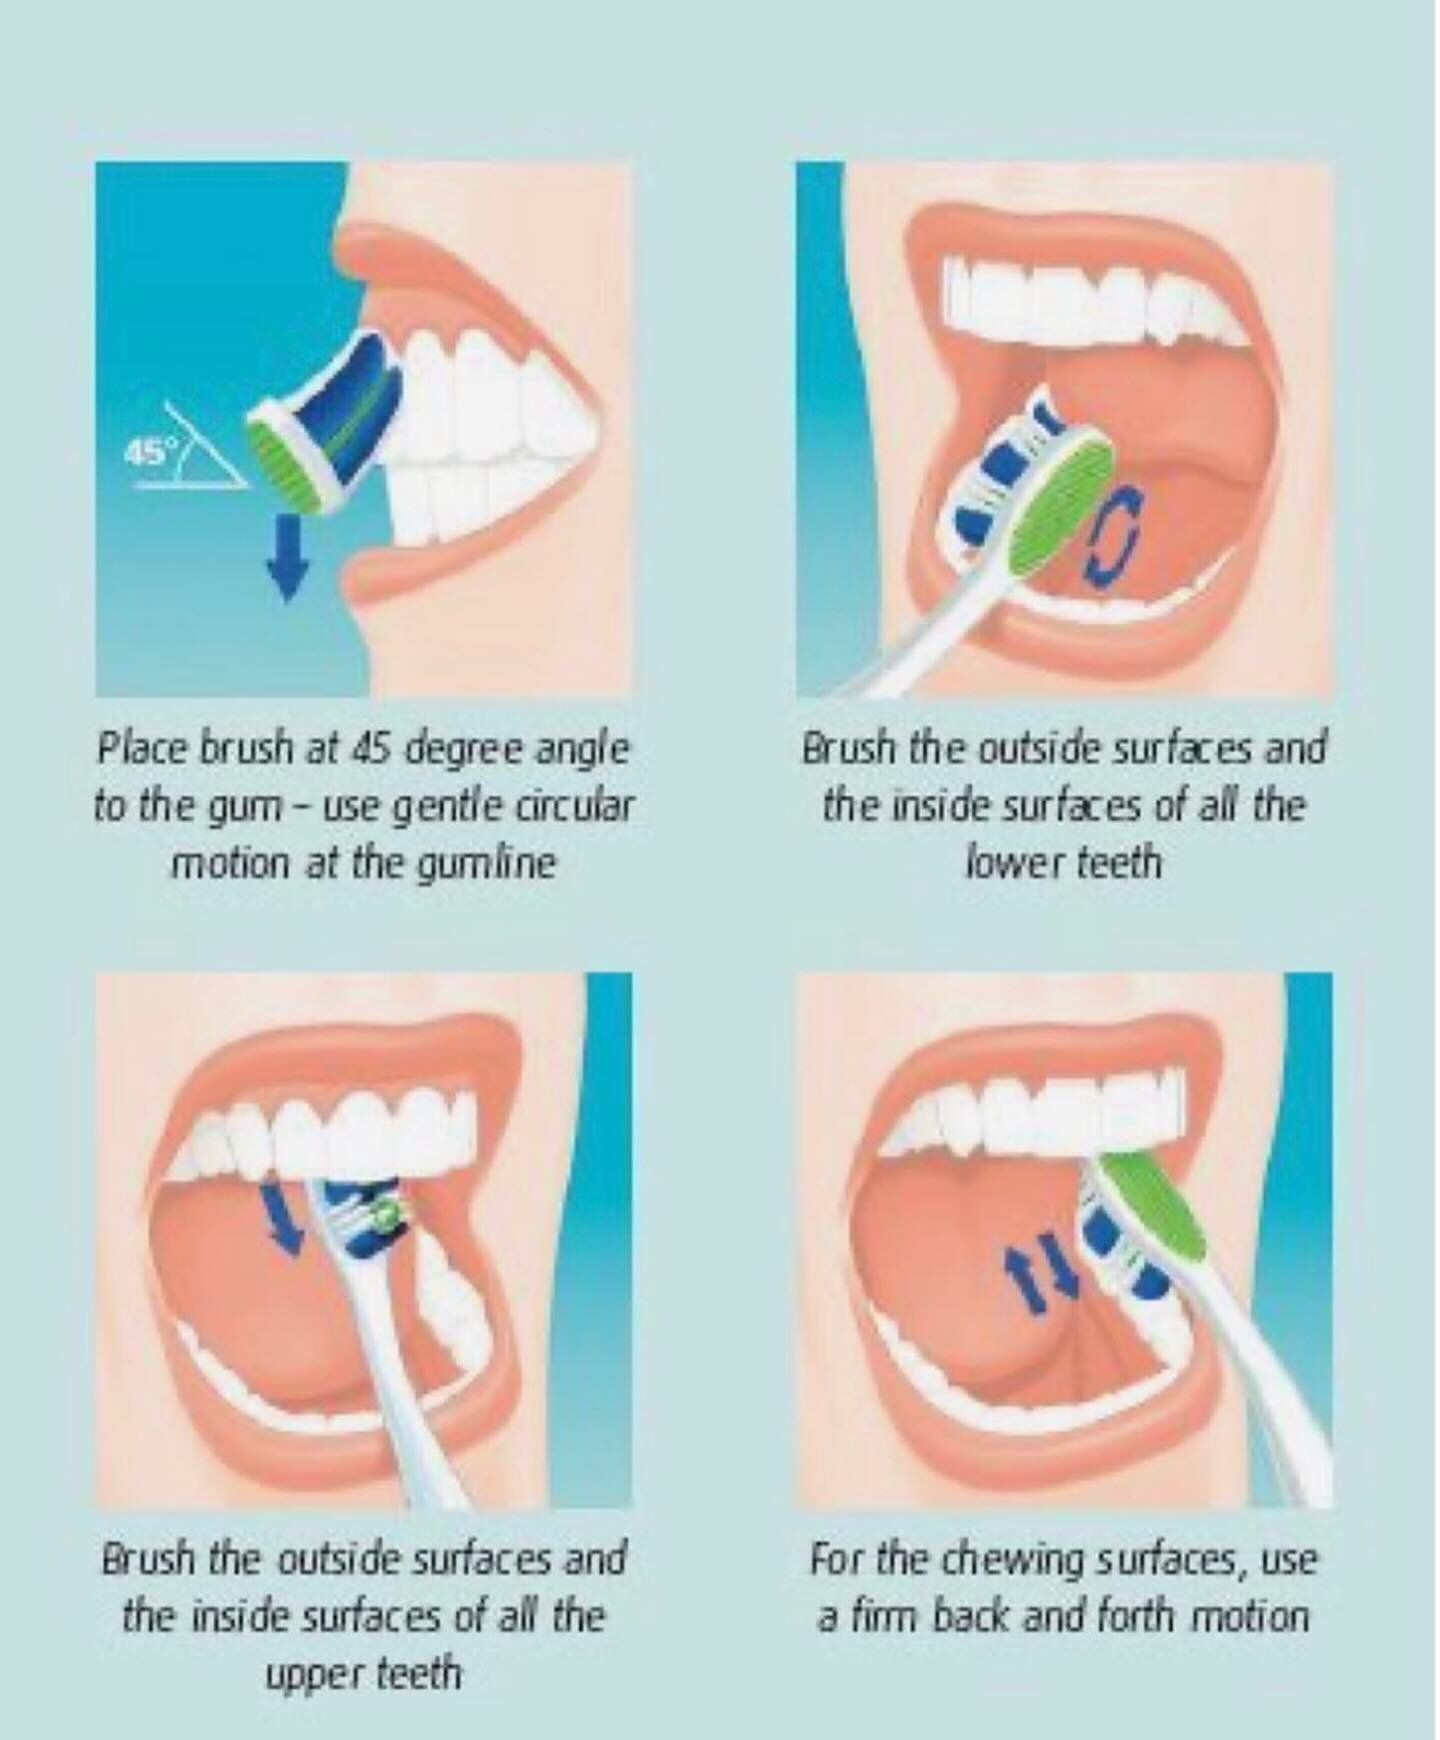 We know it happens to everyone. You get into a routine and just &ldquo;brush to get done&rdquo;. That means your teeth aren&rsquo;t getting nearly as long or as thorough a cleaning as they need&hellip; and here&rsquo;s your friendly reminder that you